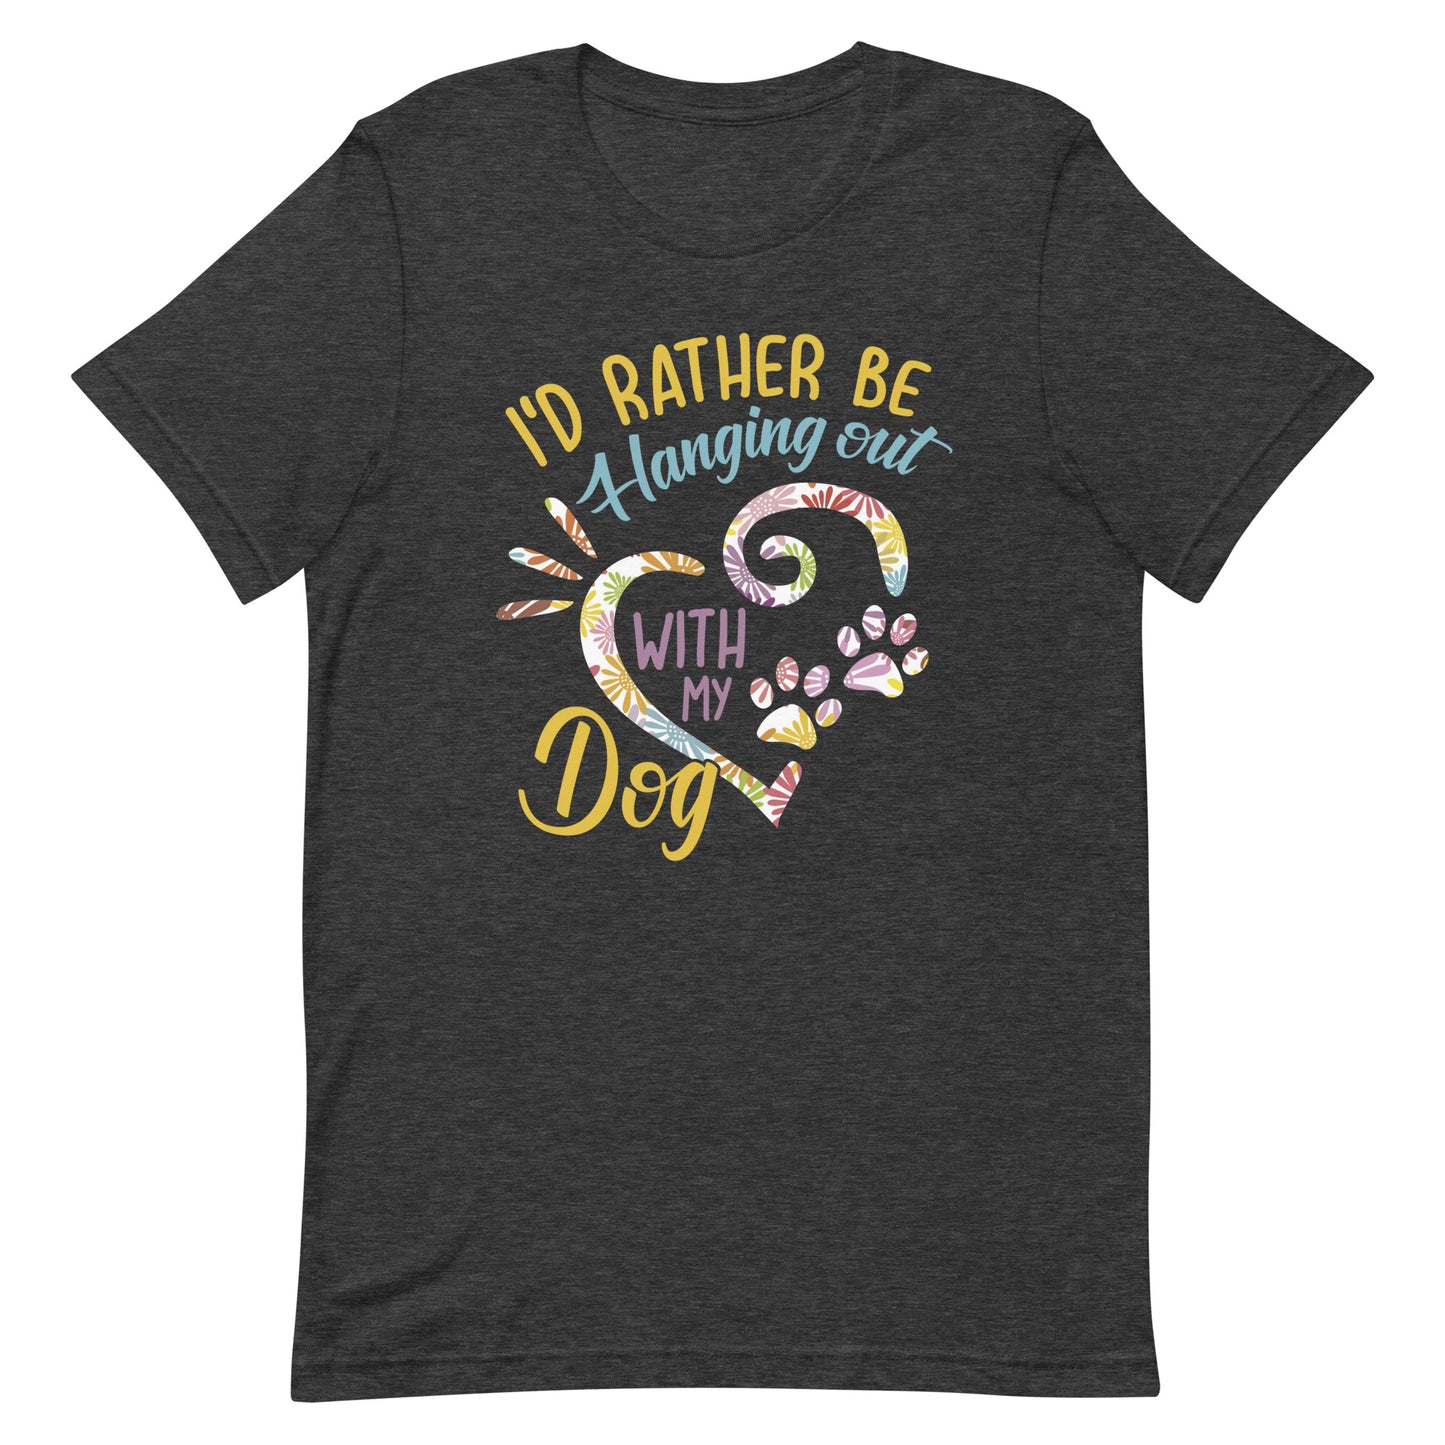 I'd Rather Be Hanging Out with My Dog T-Shirt